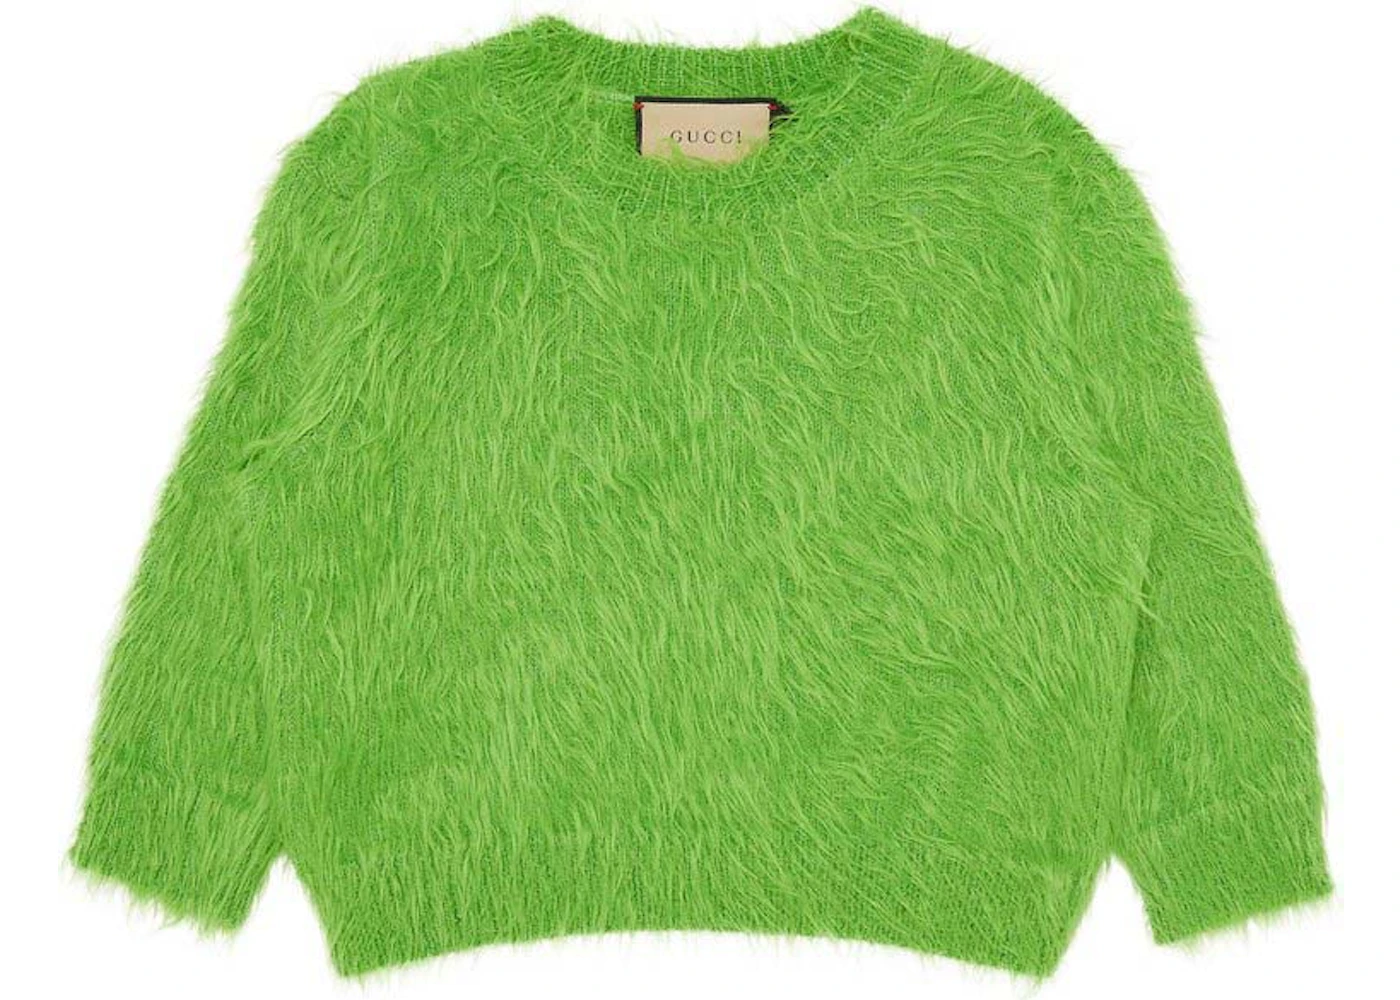 Gucci Brushed Wool Knit Sweater Green - US